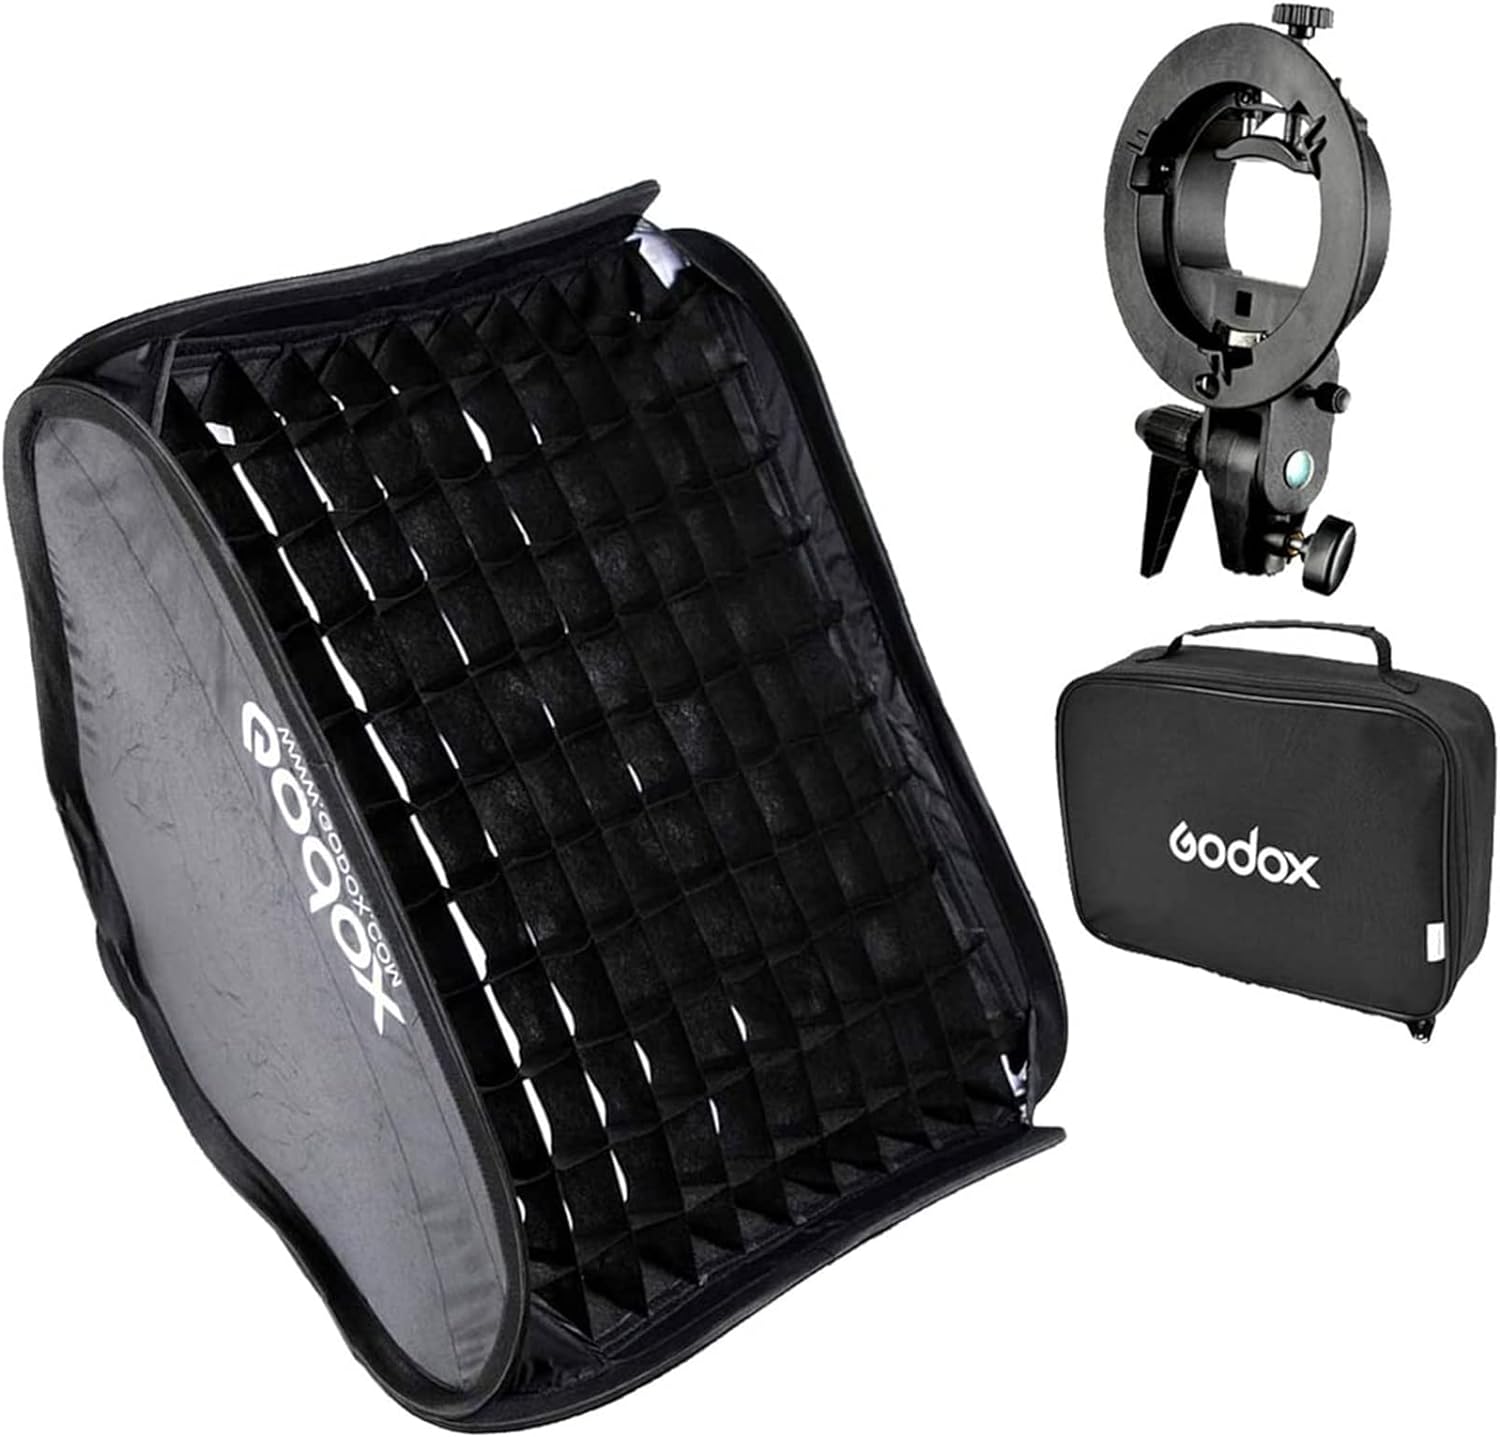 Godox S Type Bracket Bowens Holder S Mount Holder with Foldable 80x80cm /32x32 inches Softbox and Honeycomb Grid & Bag Kit for Flash Camera Studio Photography F-S-80cm+WG-KIT